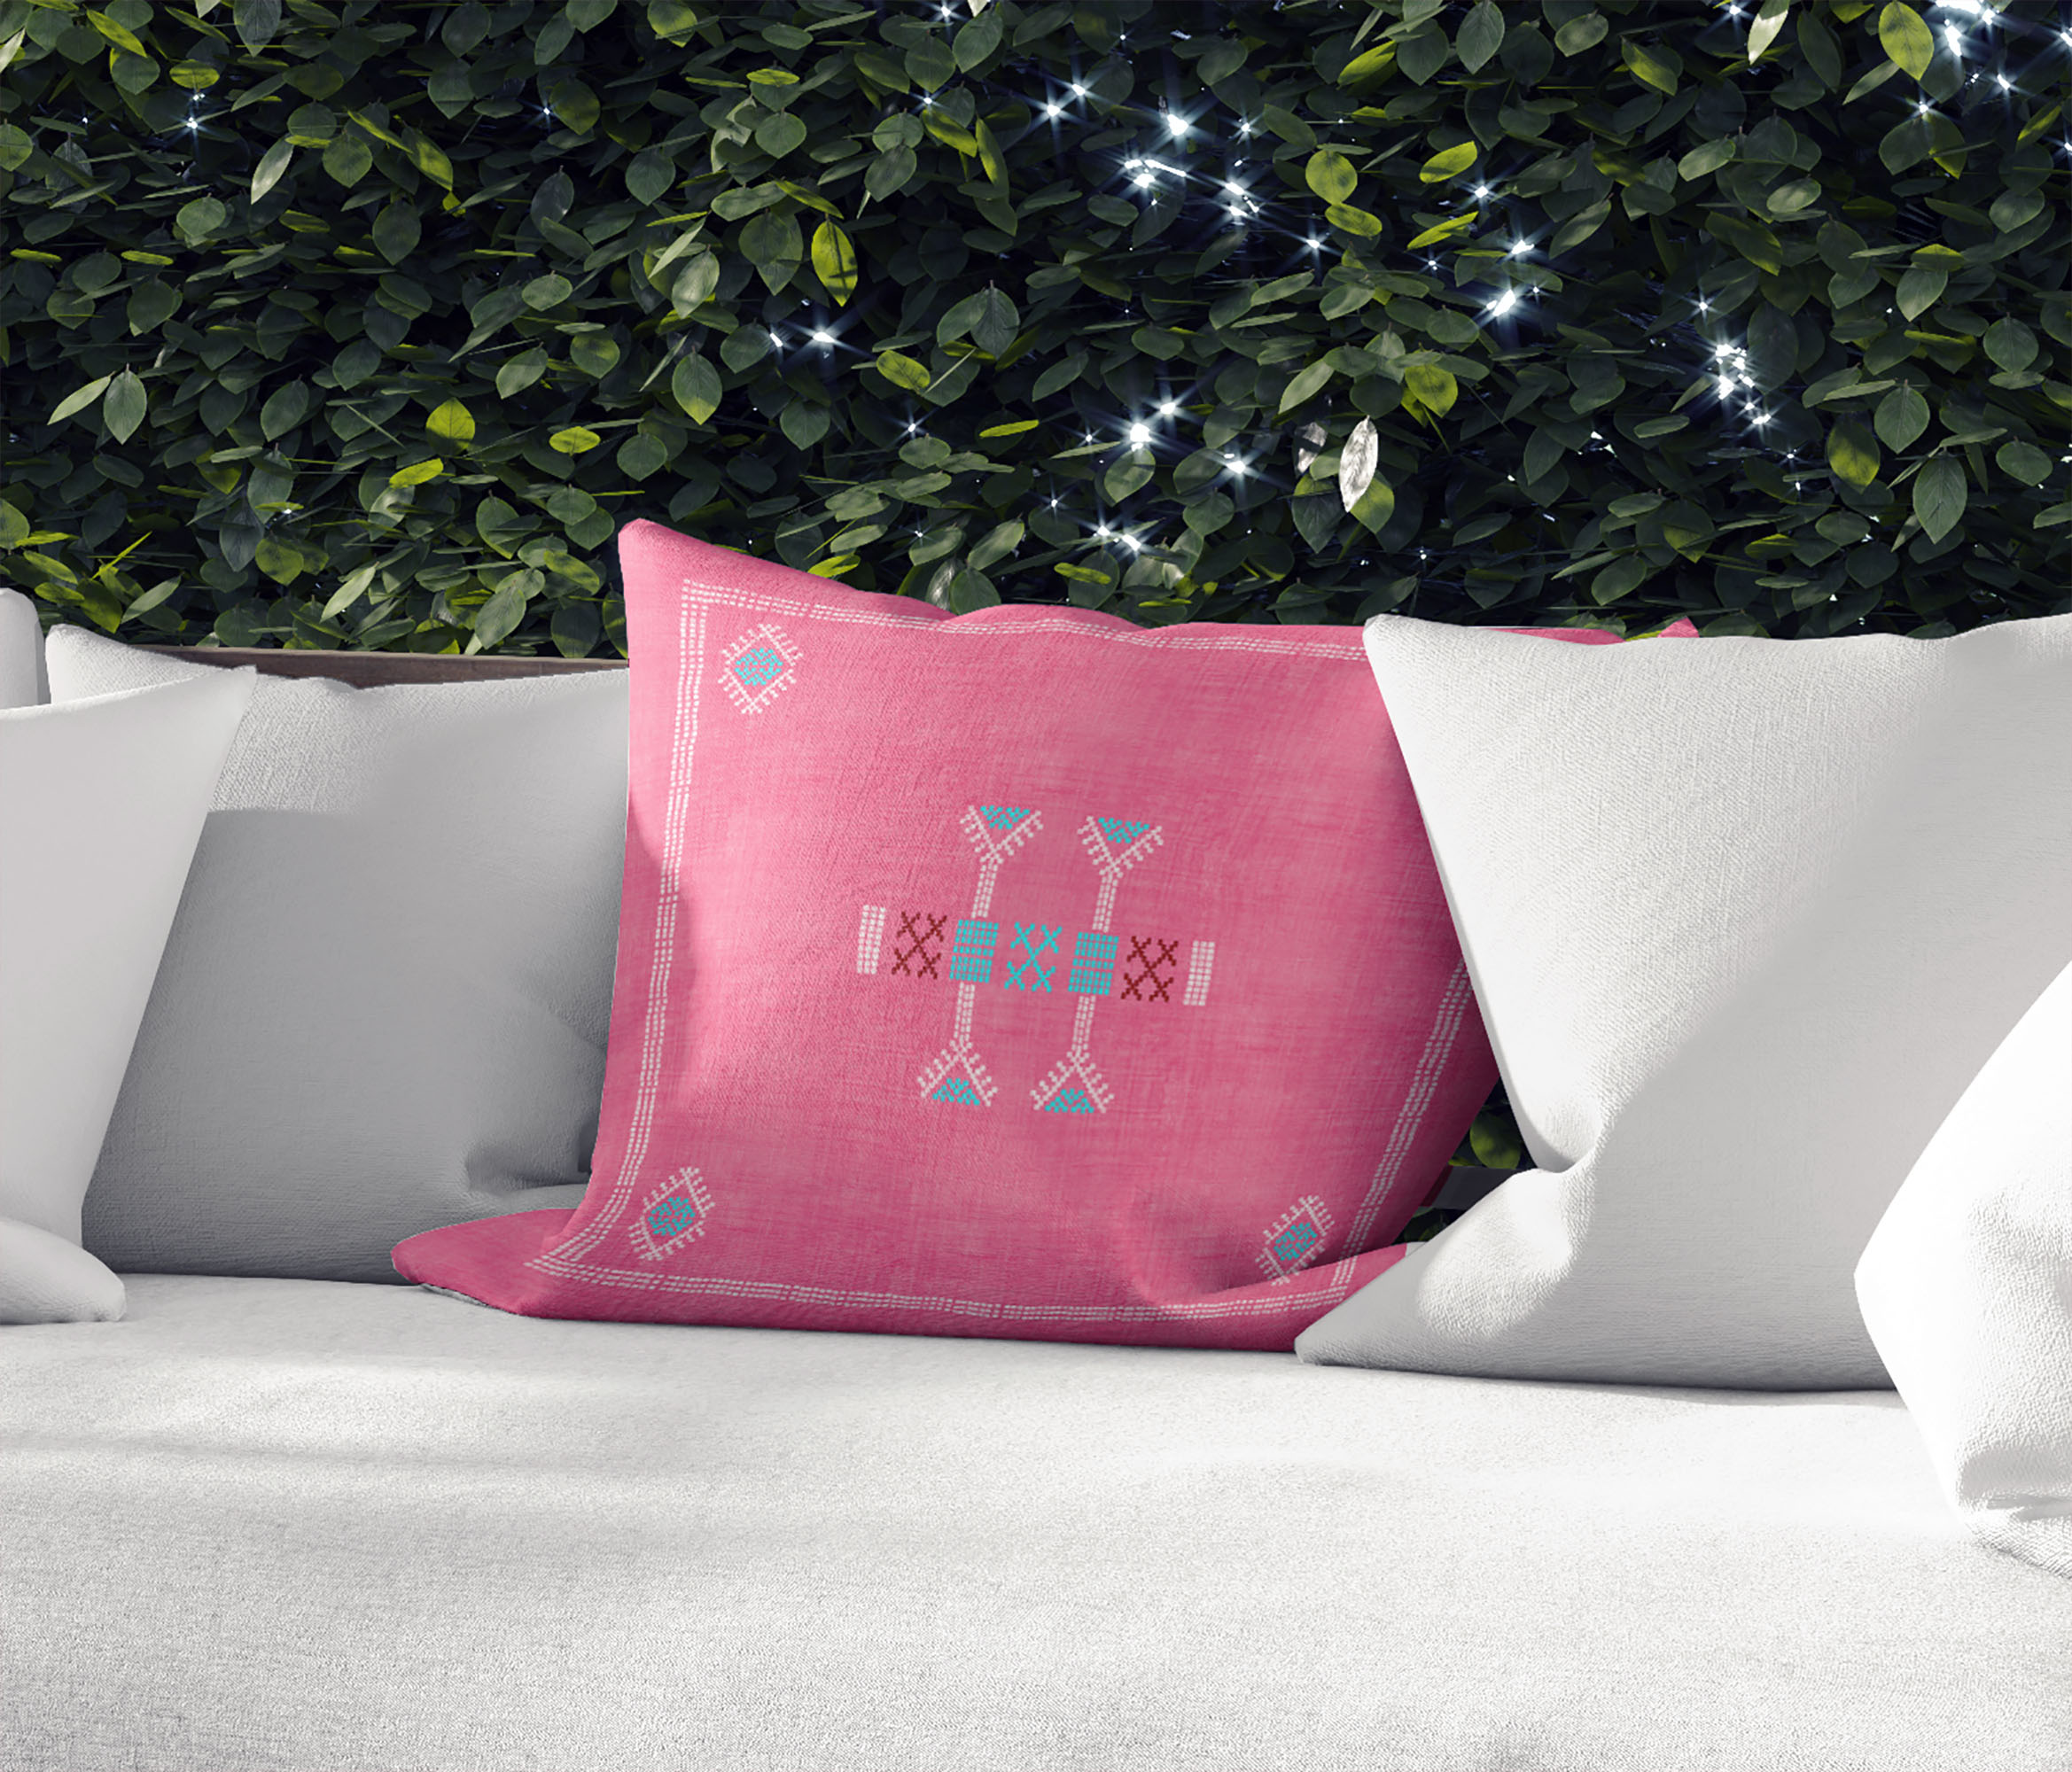 Moroccan Kilim Pink Outdoor Pillow by Kavka Designs - image 5 of 5